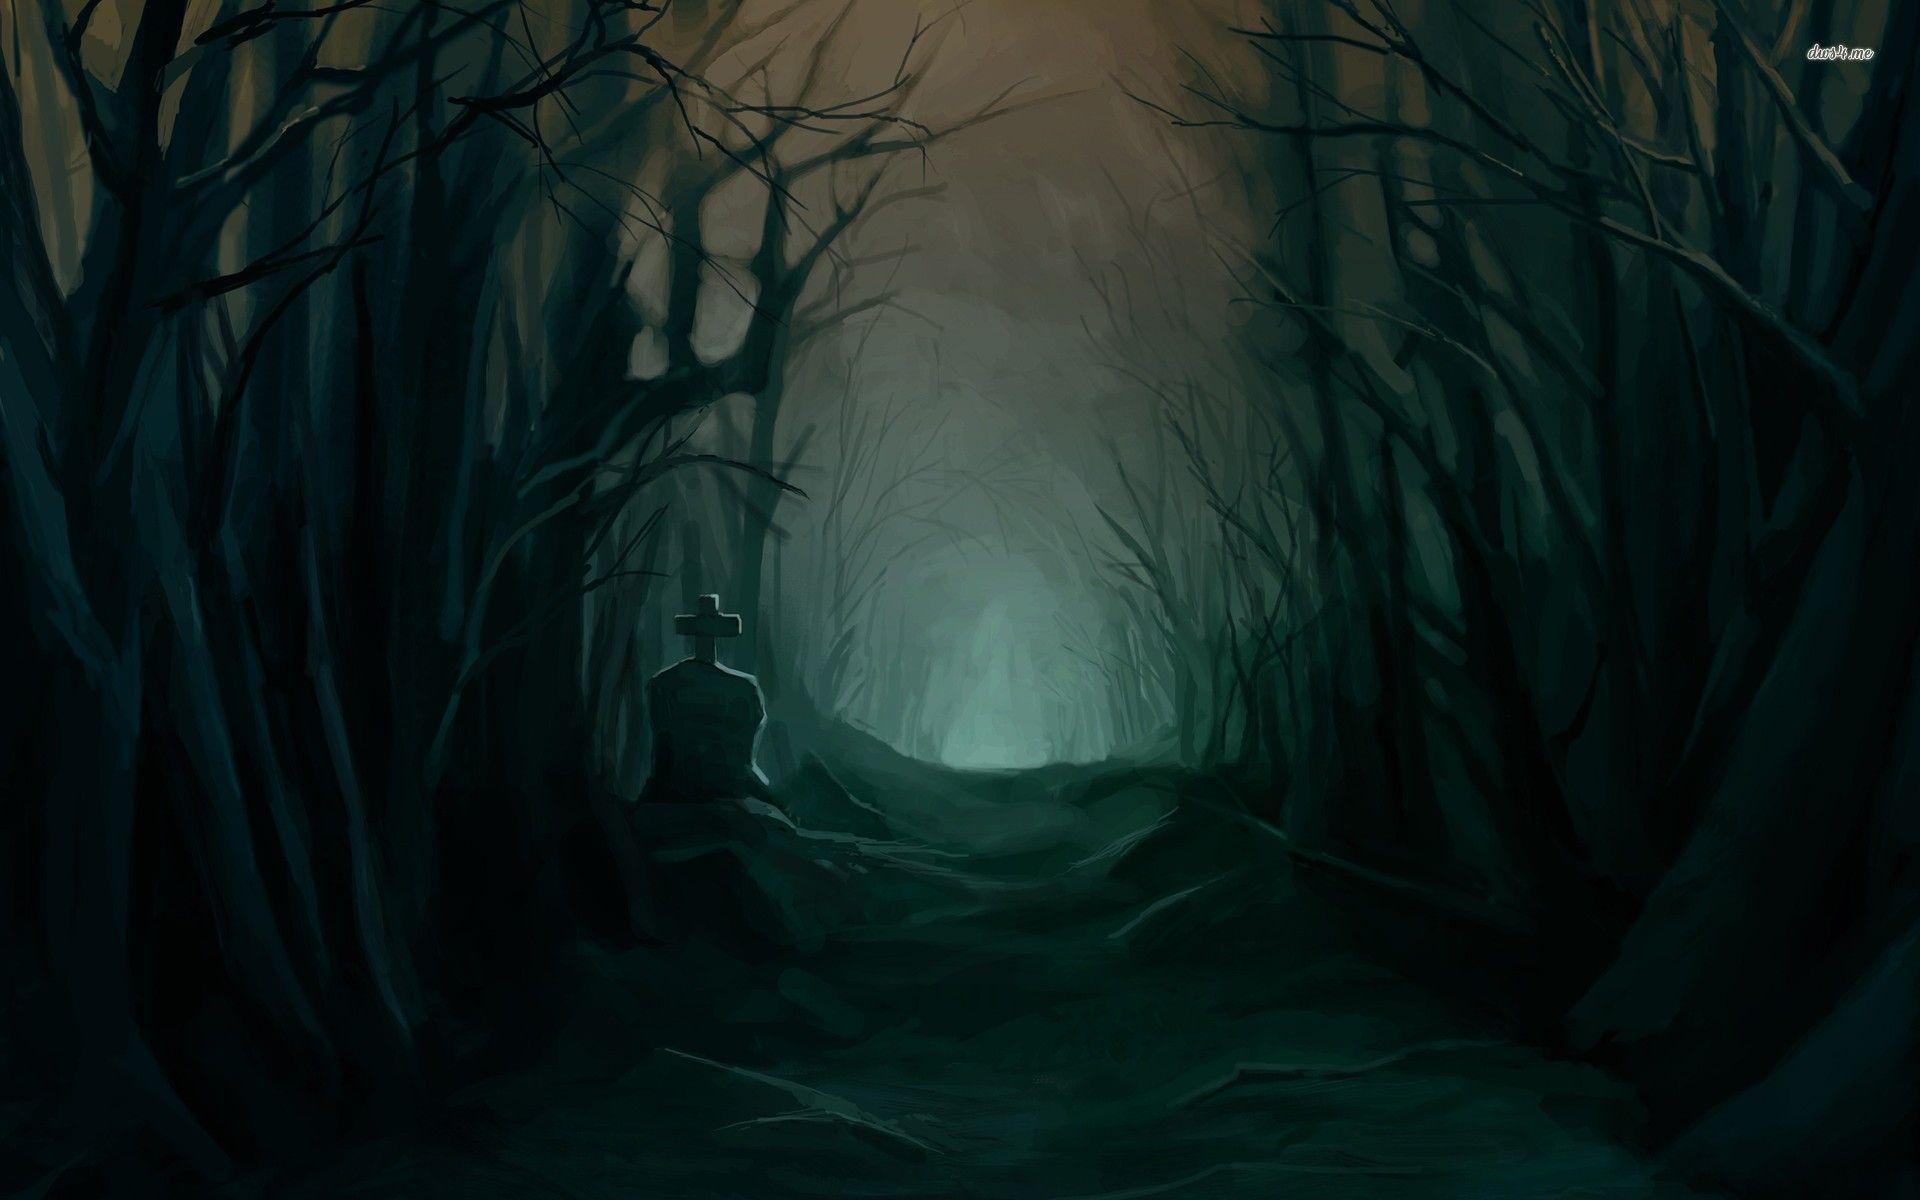 Dark Forest Moon Wallpaper Background On Wallpaper 1080p HD. Scary background, Landscape wallpaper, Halloween trees